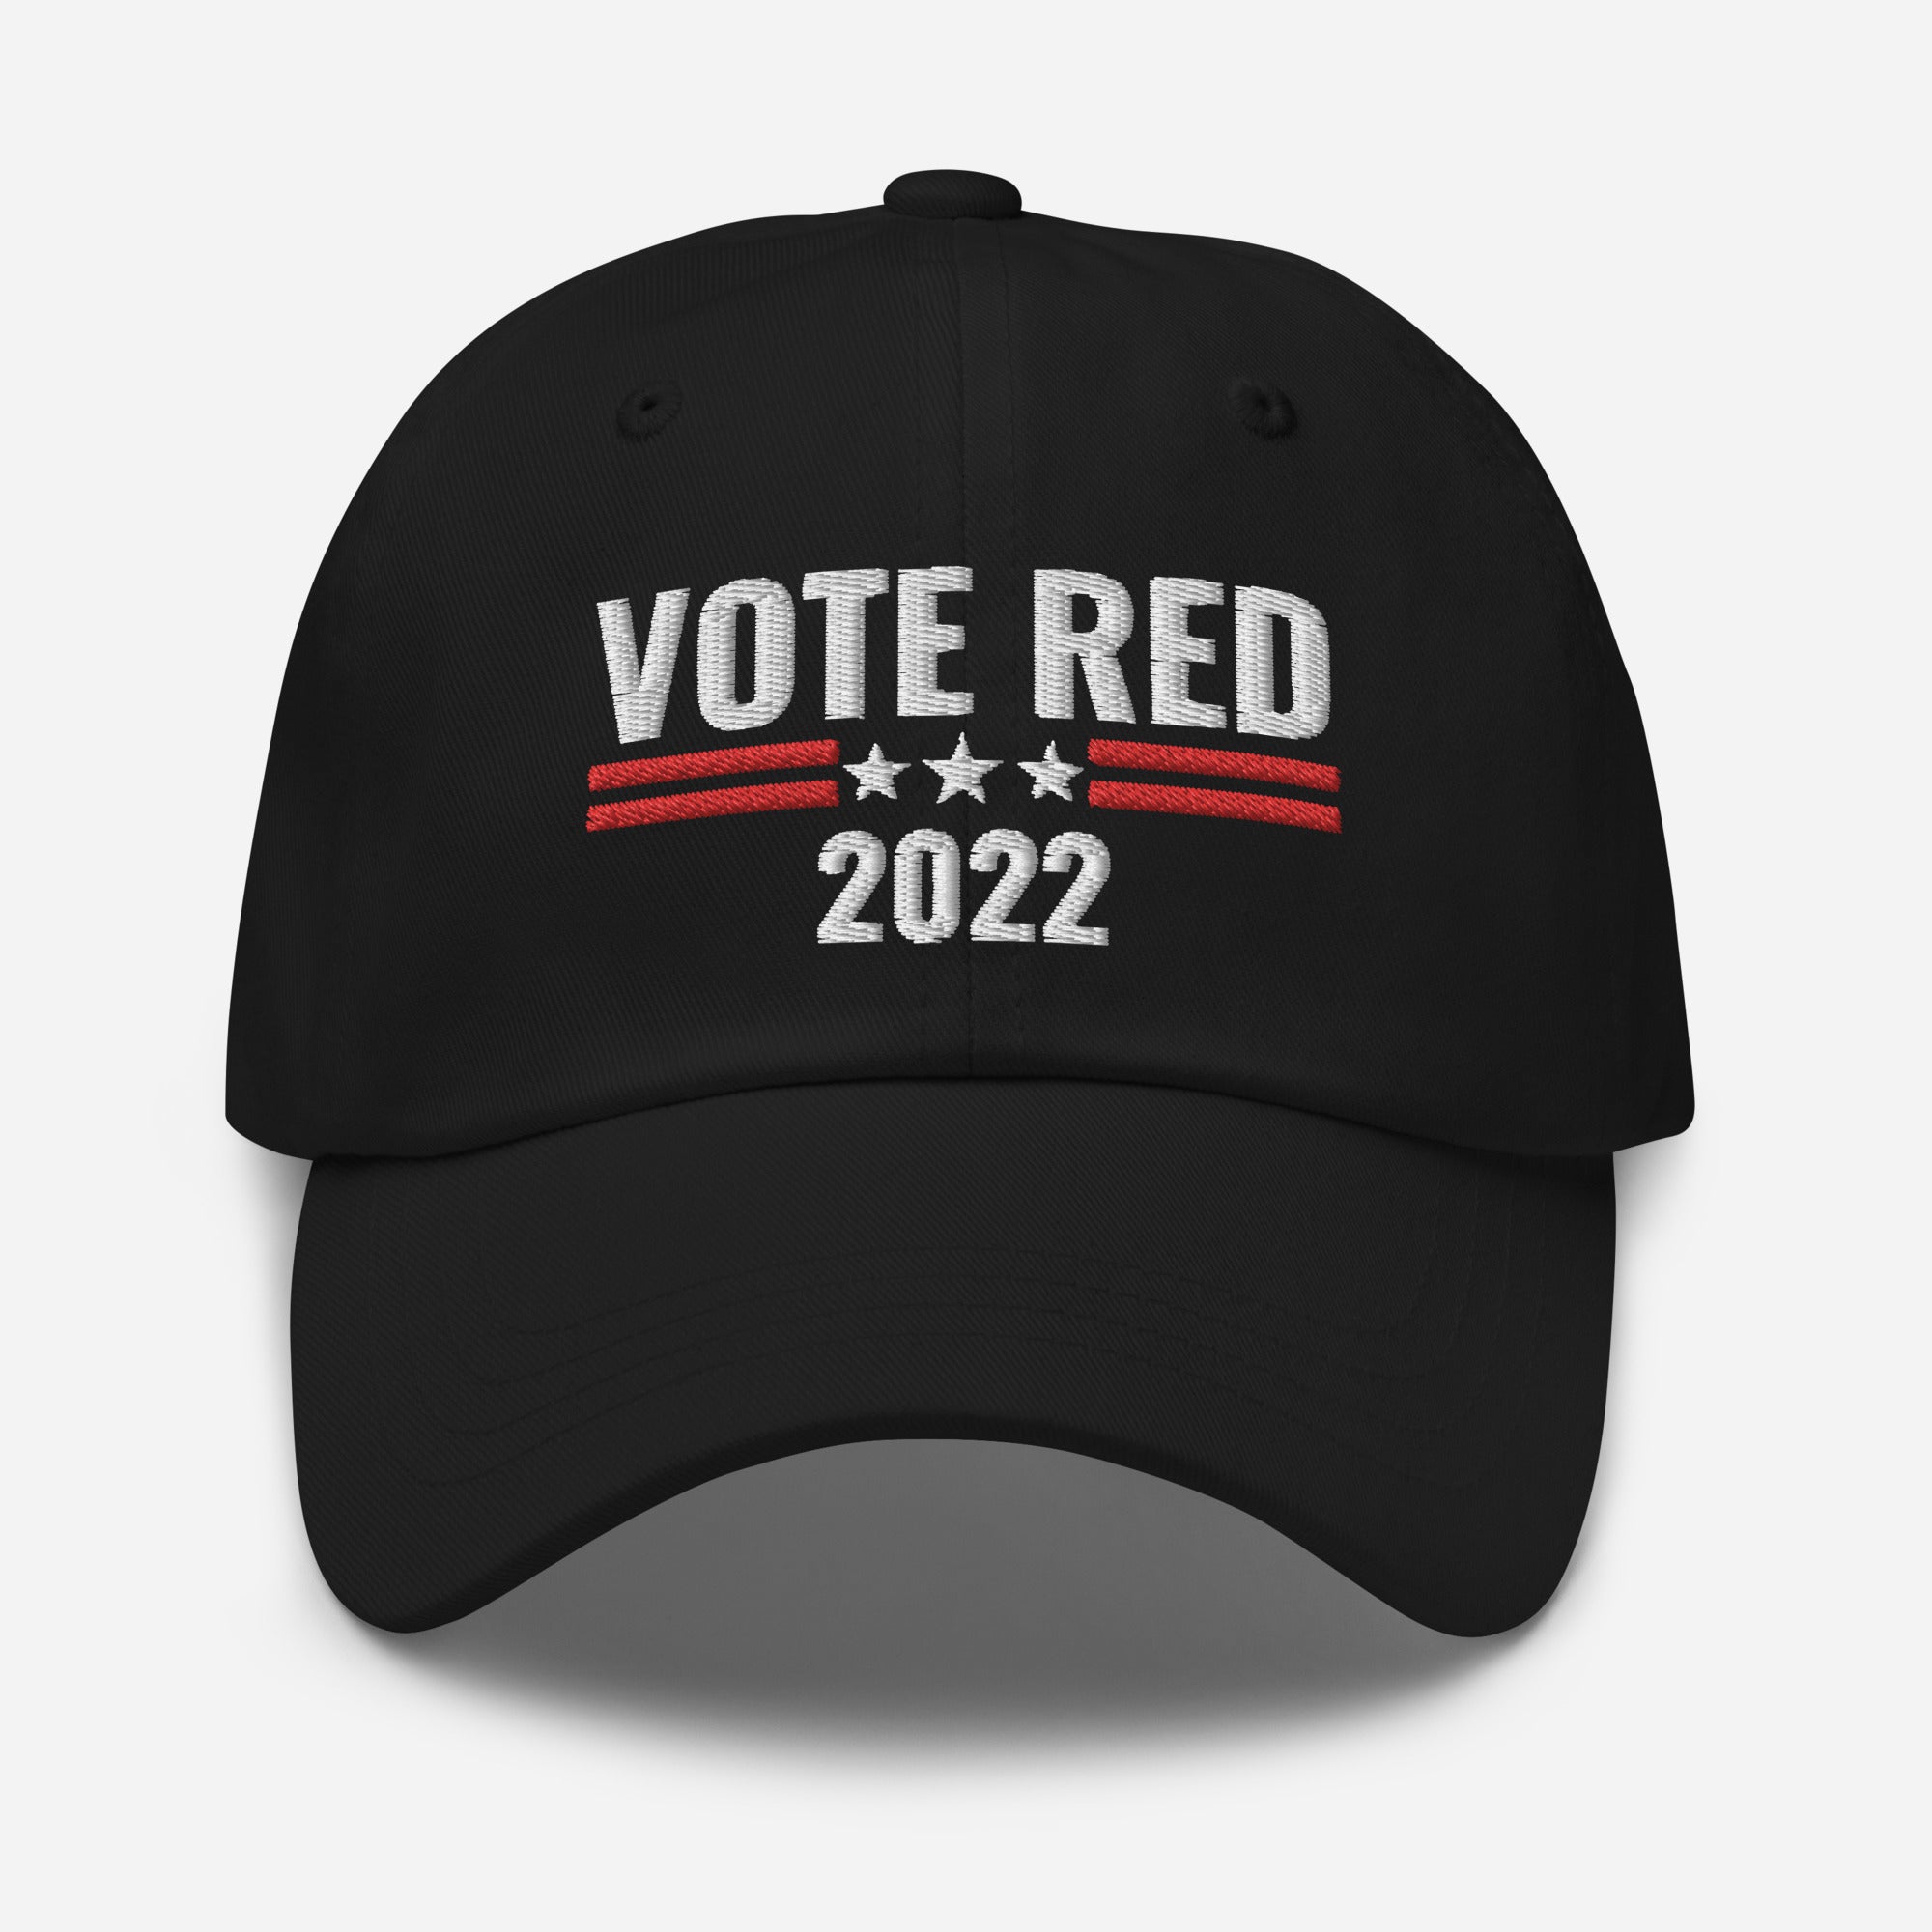 Vote Red 2022 Hat, Republican Hats, Midterm Election 2022, FJB Cap, Patriotic Dad Hat, Red Wave 22, Ultra MAGA Hat, Conservative Gifts - Madeinsea©